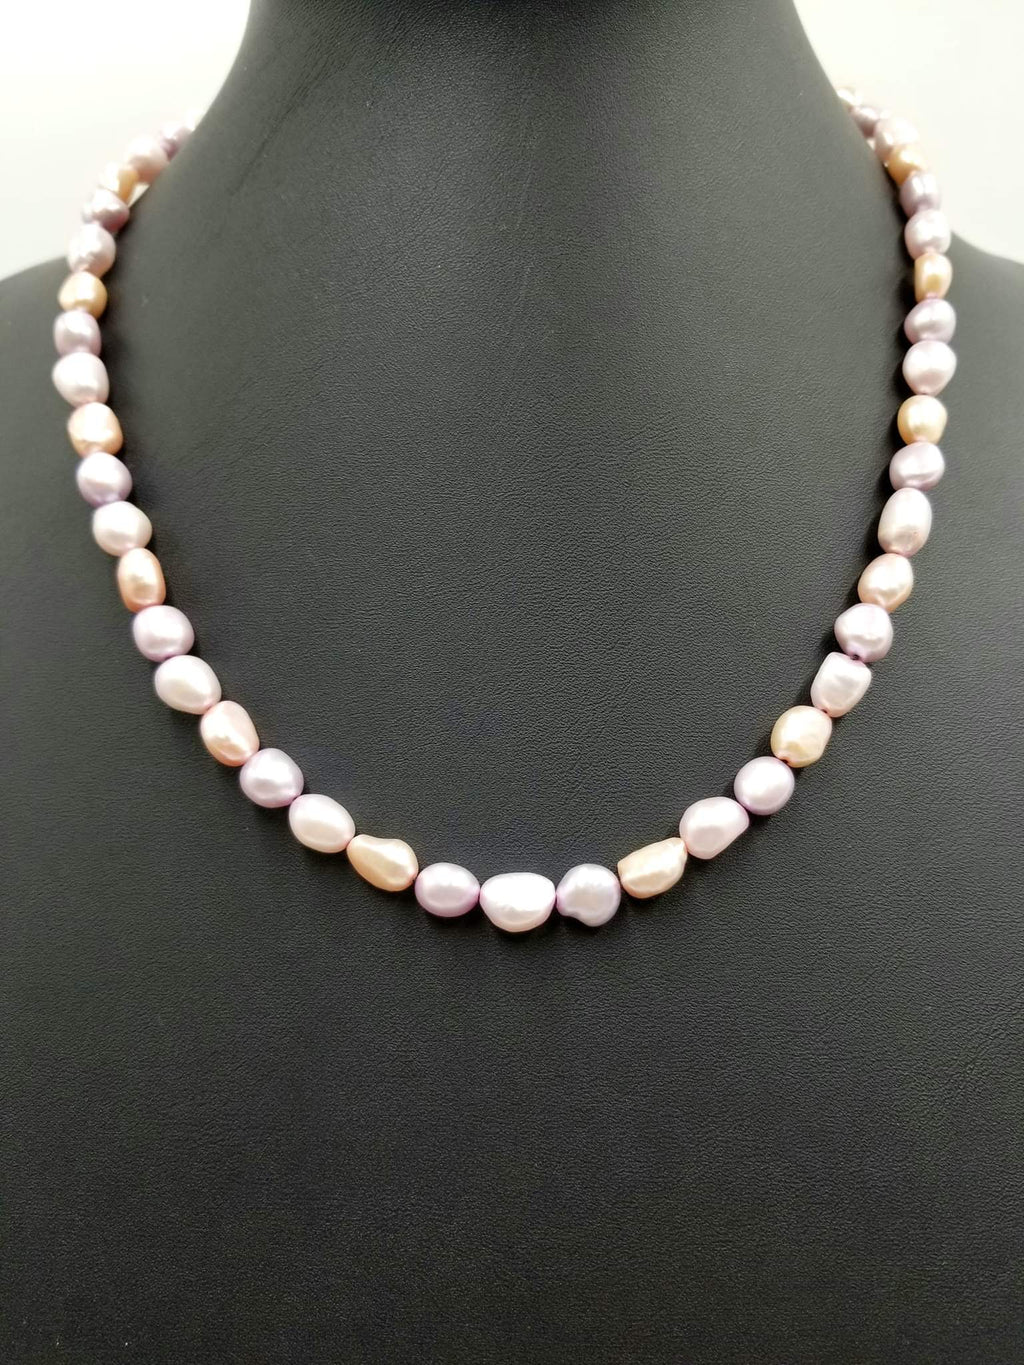 Variegated pink Pearls, hand-knotted on silk with 14Kyellow gold clasp and accents.  Necklace. 20.5" Length.